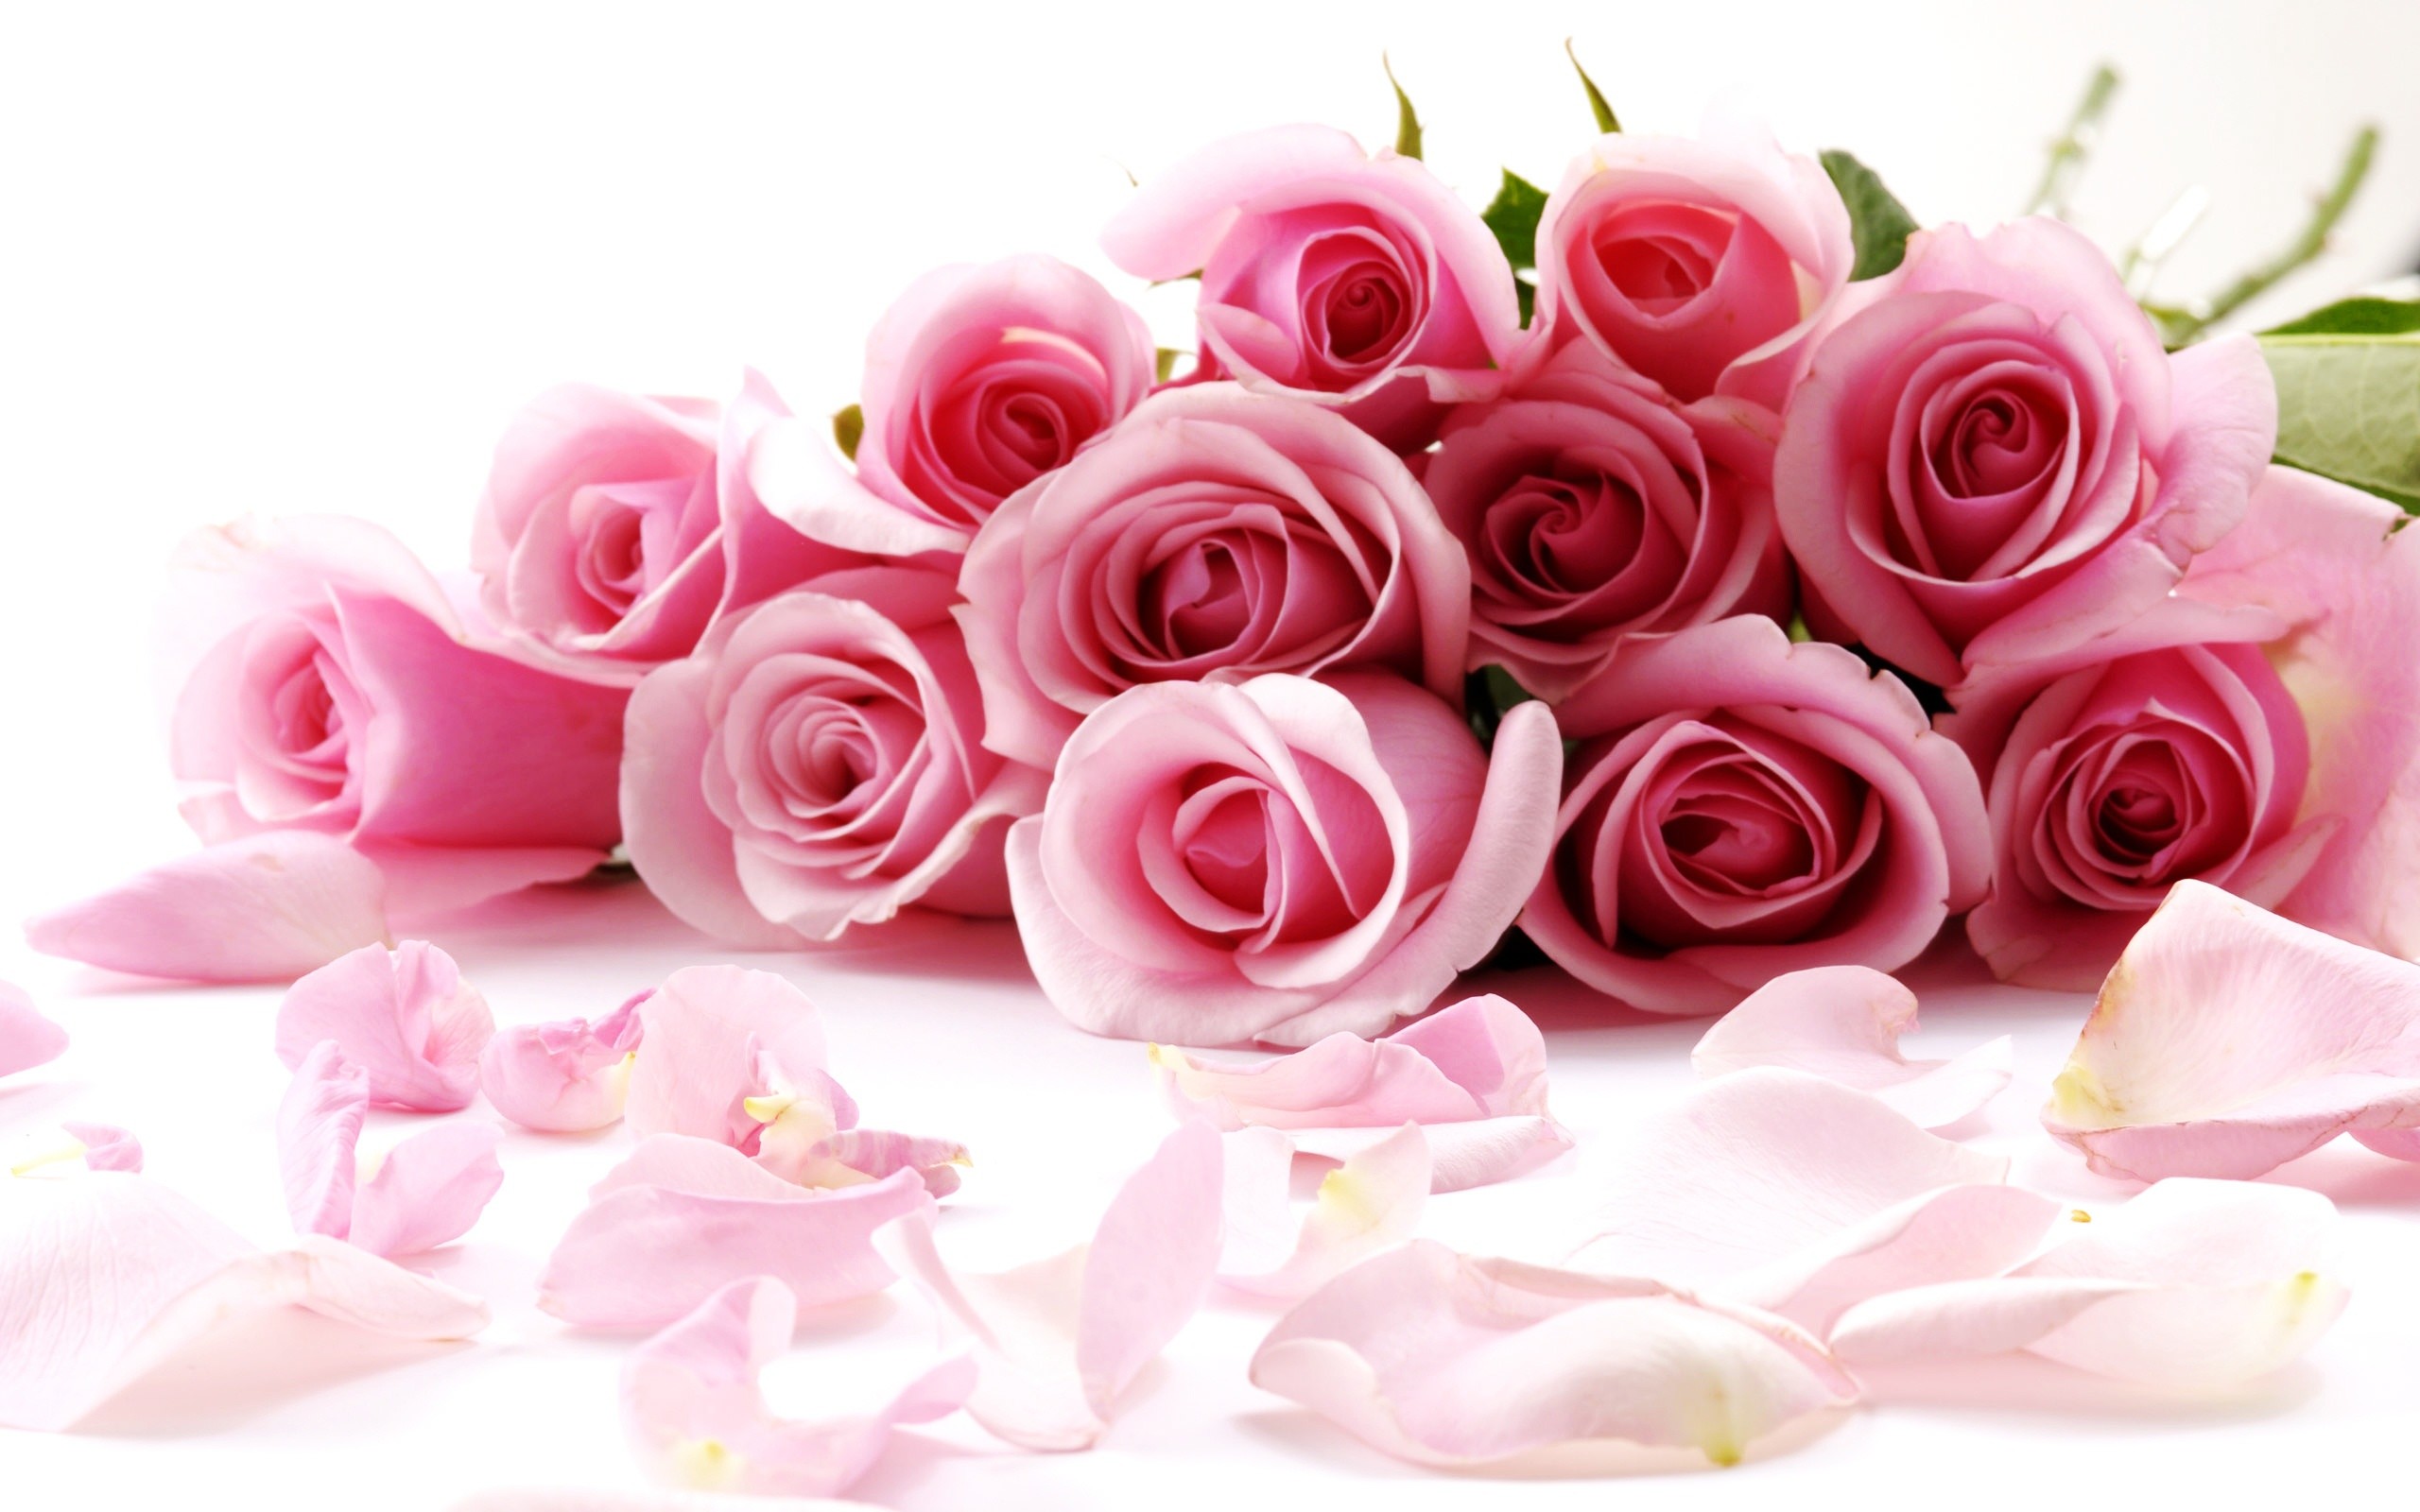 2560x1600, Rose Flowers Wallpapers Collection 
 Data - Rose Wallpaper Pictures Of Flowers - HD Wallpaper 